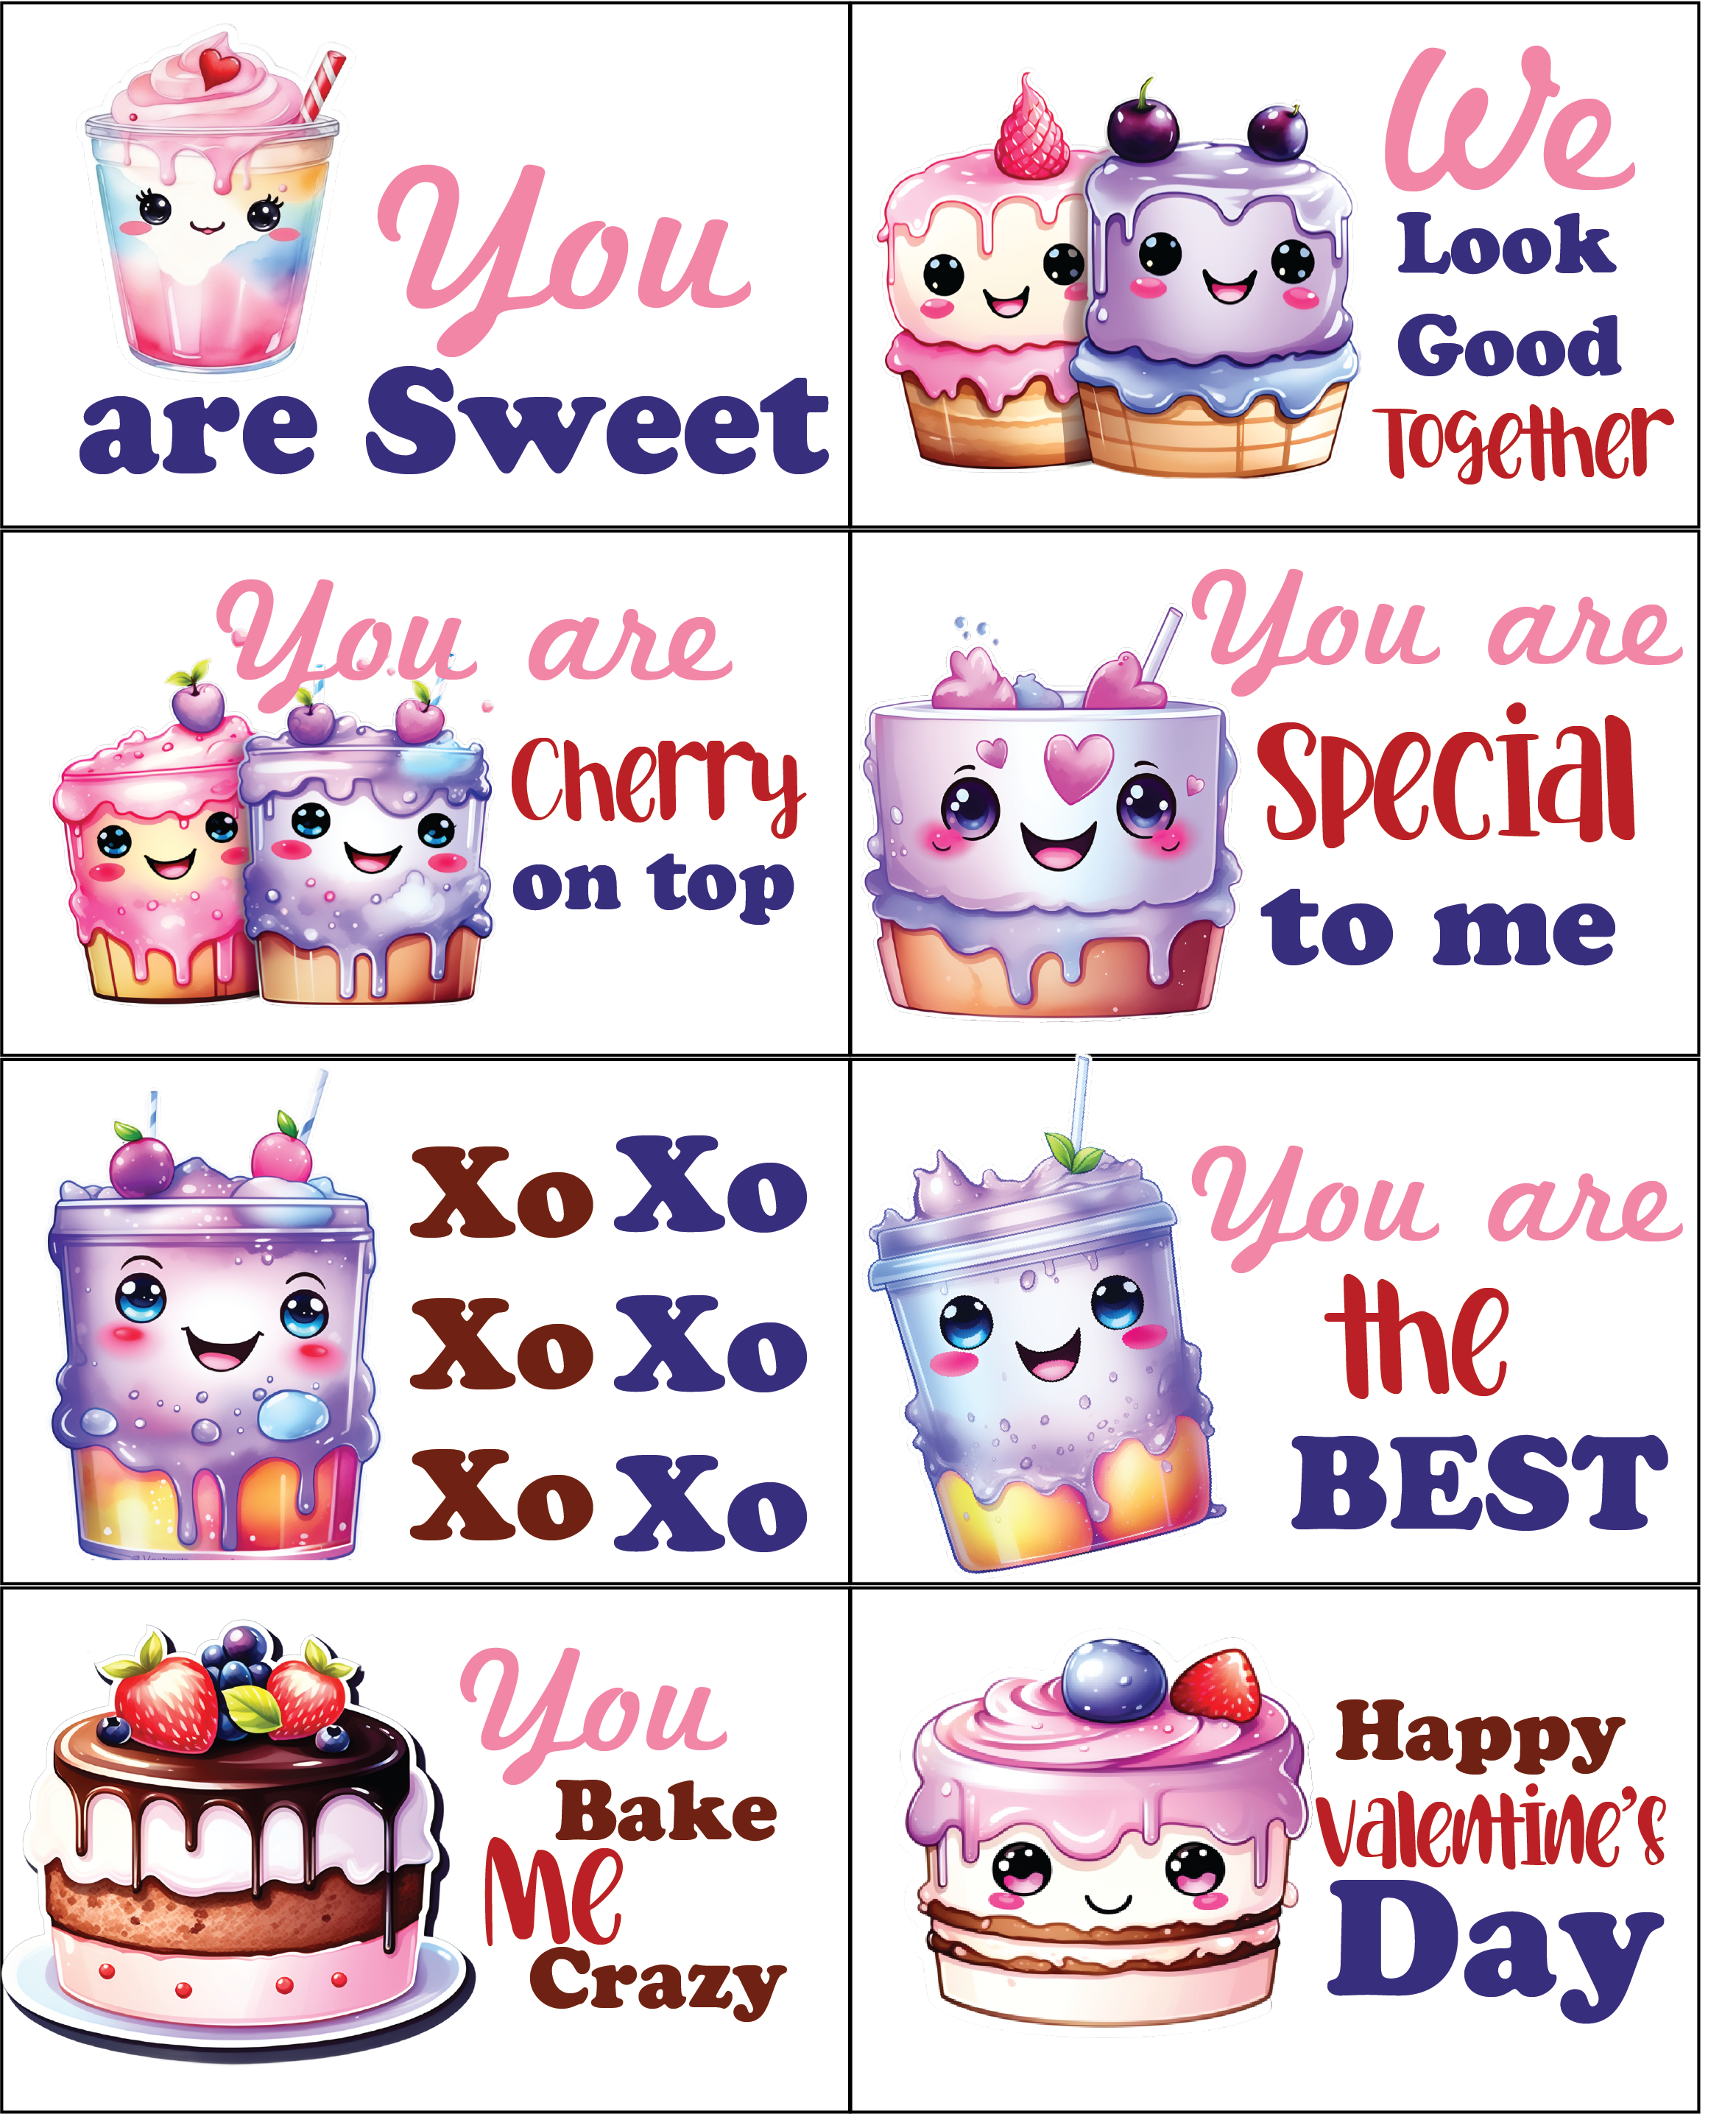 Valentines-Day-Cards